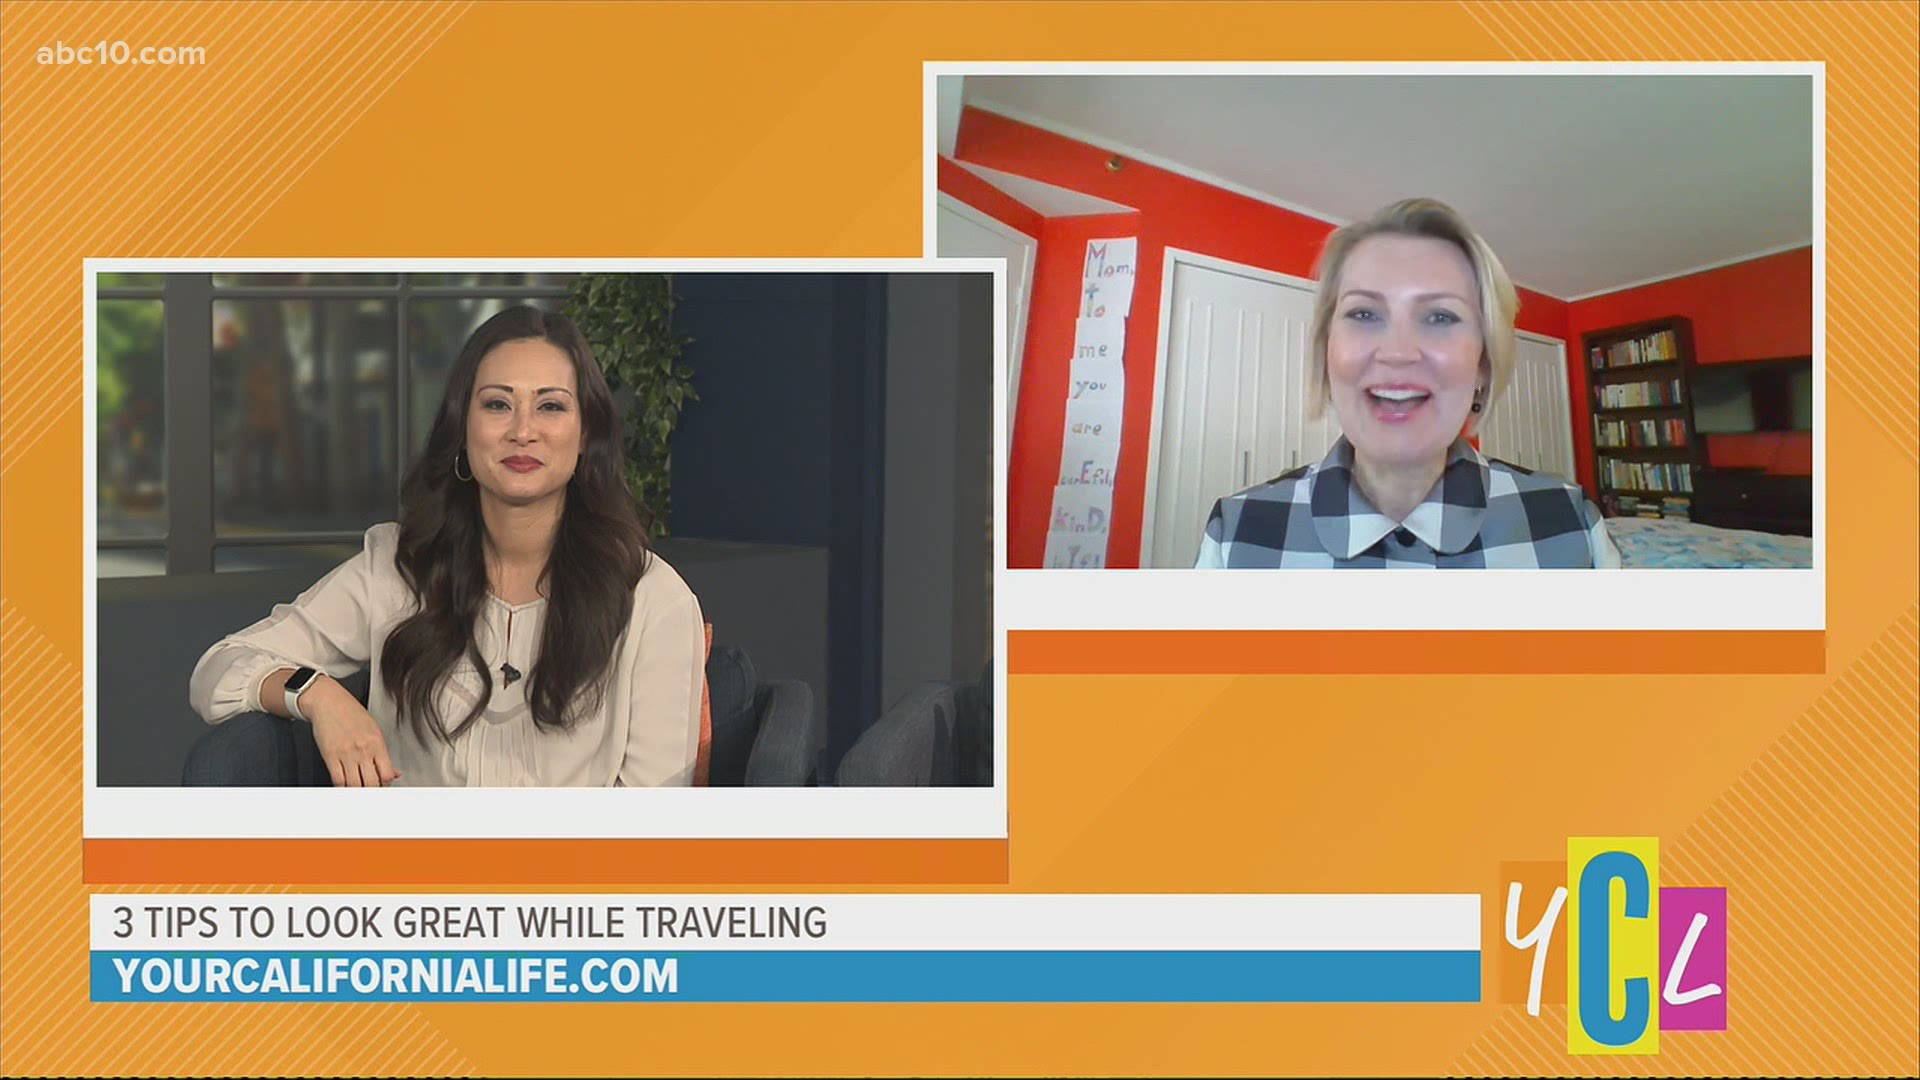 Travel Wellness and Beauty Expert Edyta Satchell has tips to look and feel your best before, during and after travel with a beauty and wellness routine.